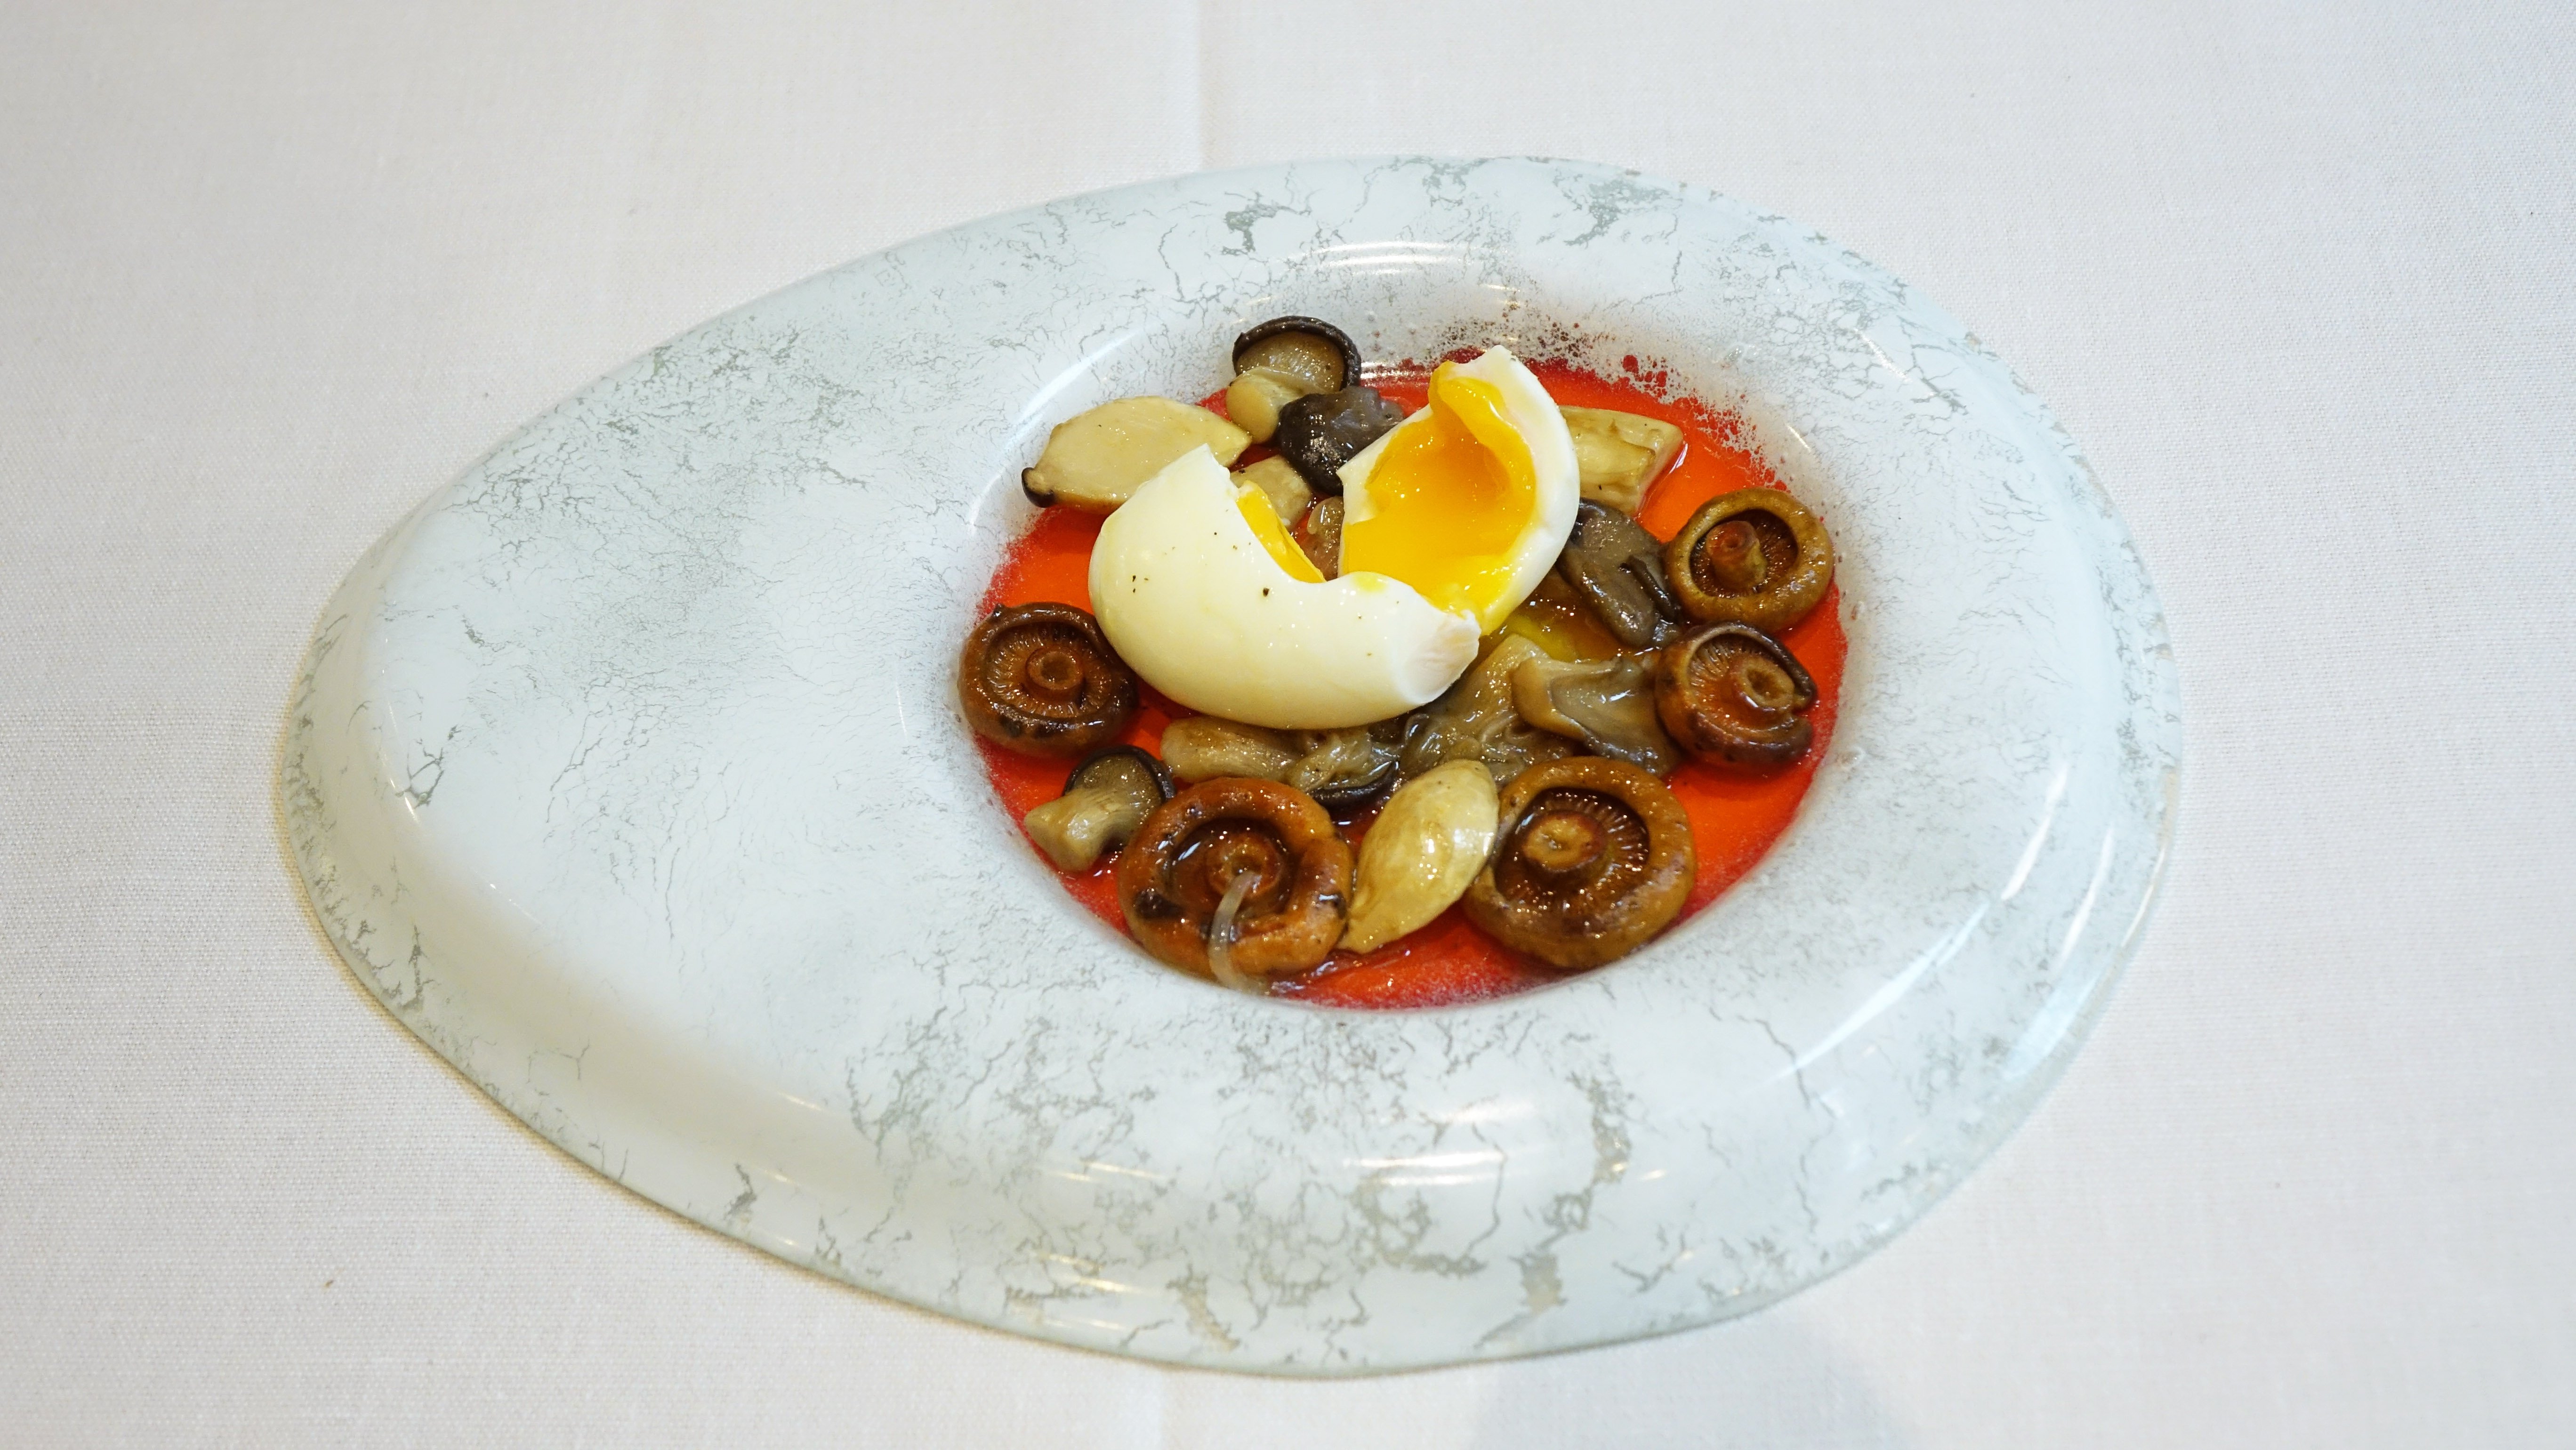 Catalan dishes: Soft-boiled egg with mushrooms